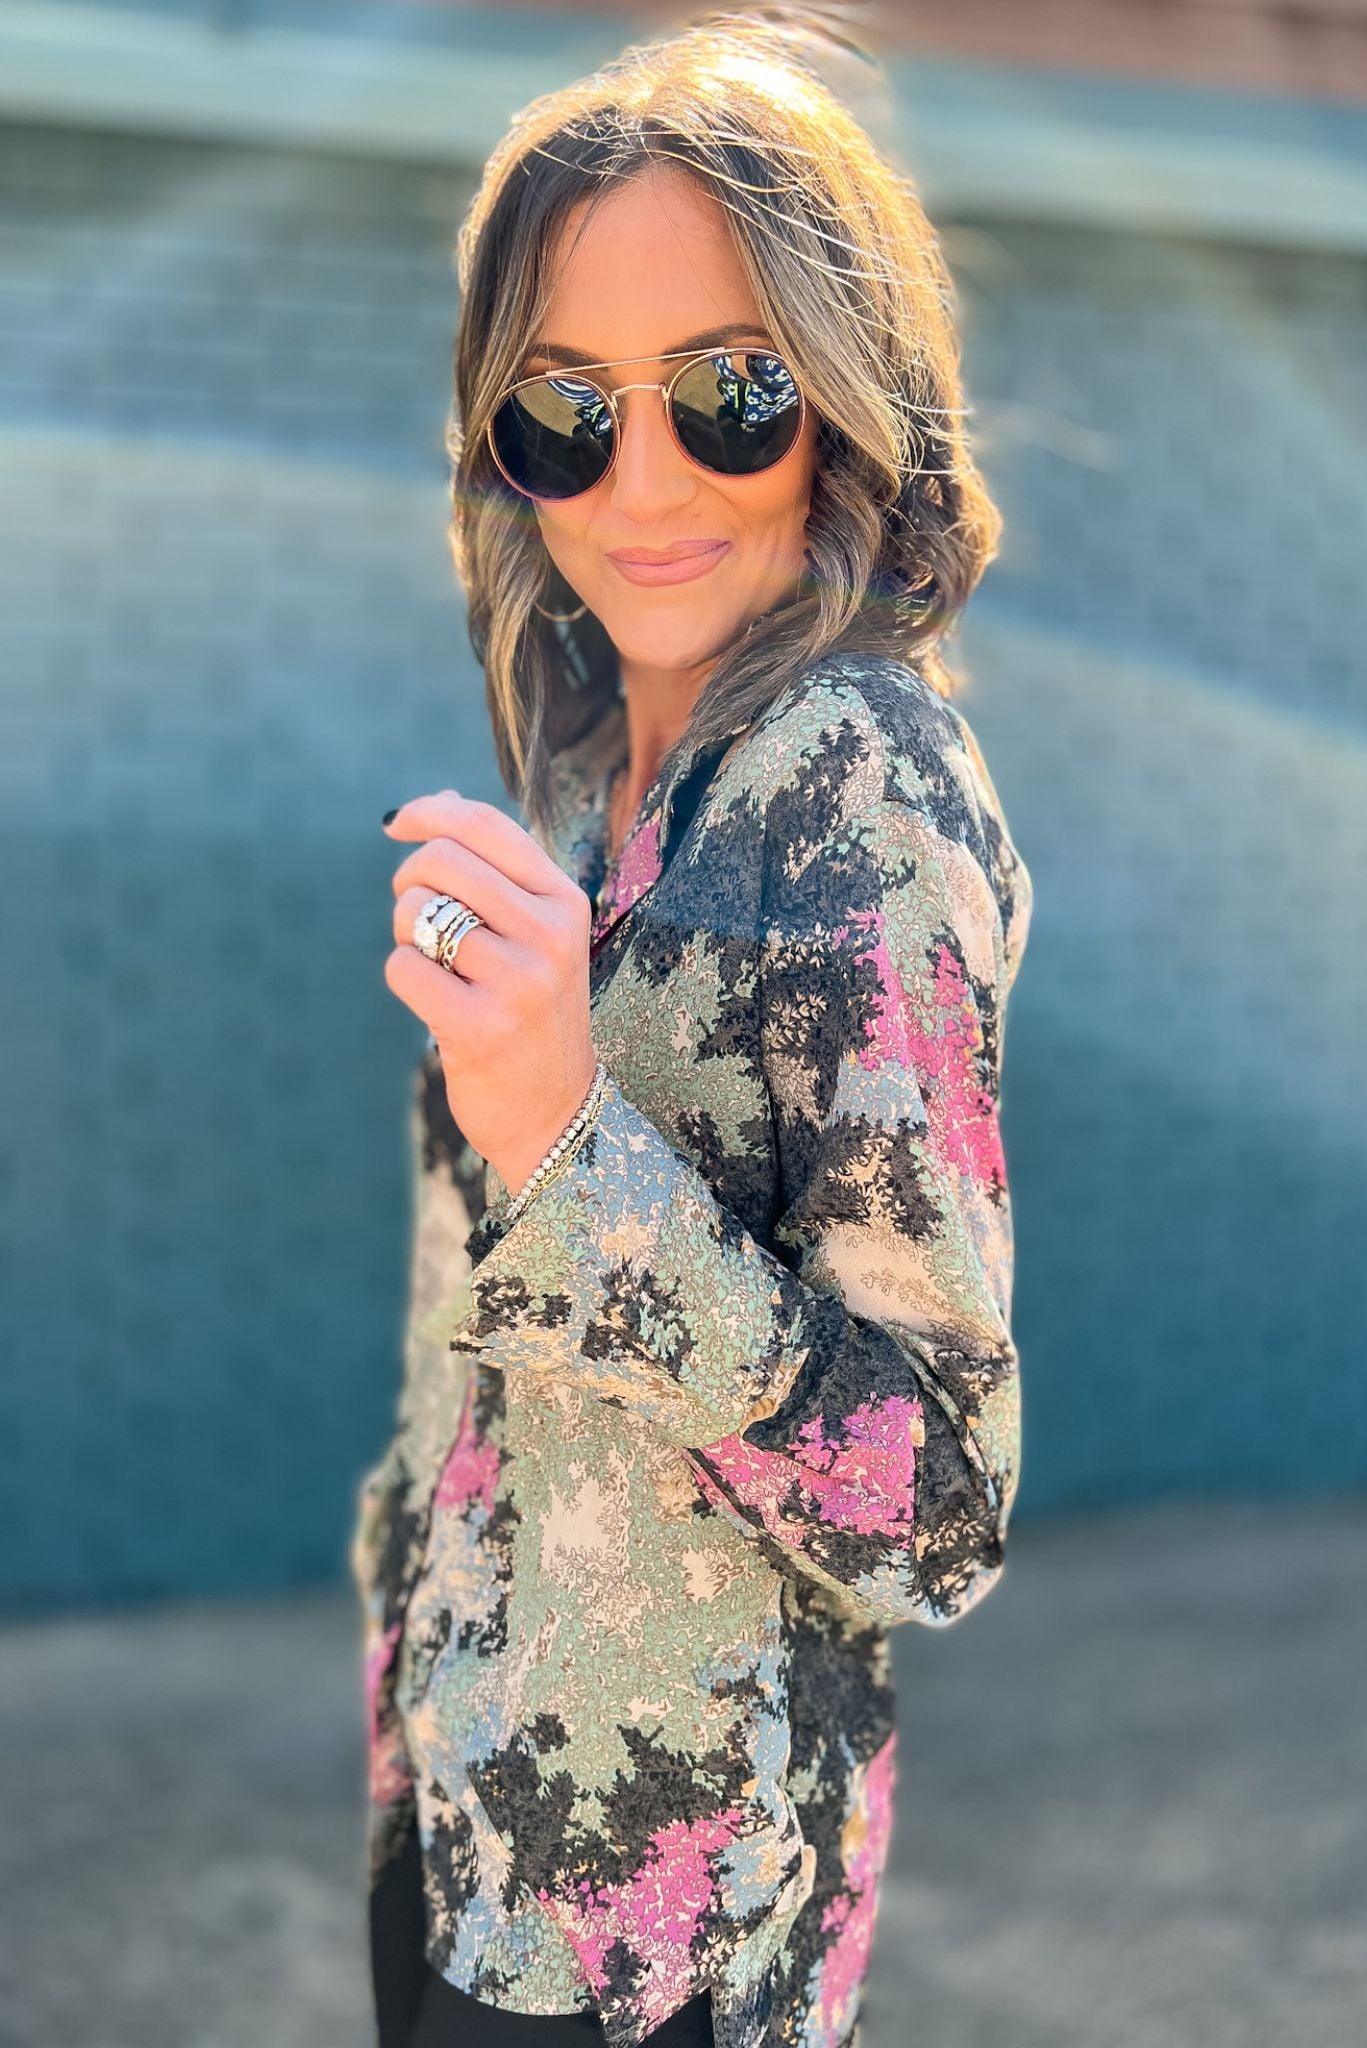 Olive Print Collared Button Down Top, fall fashion, must have, button down, printed detail, elevated look, shop style your senses by mallory fitzsimmons